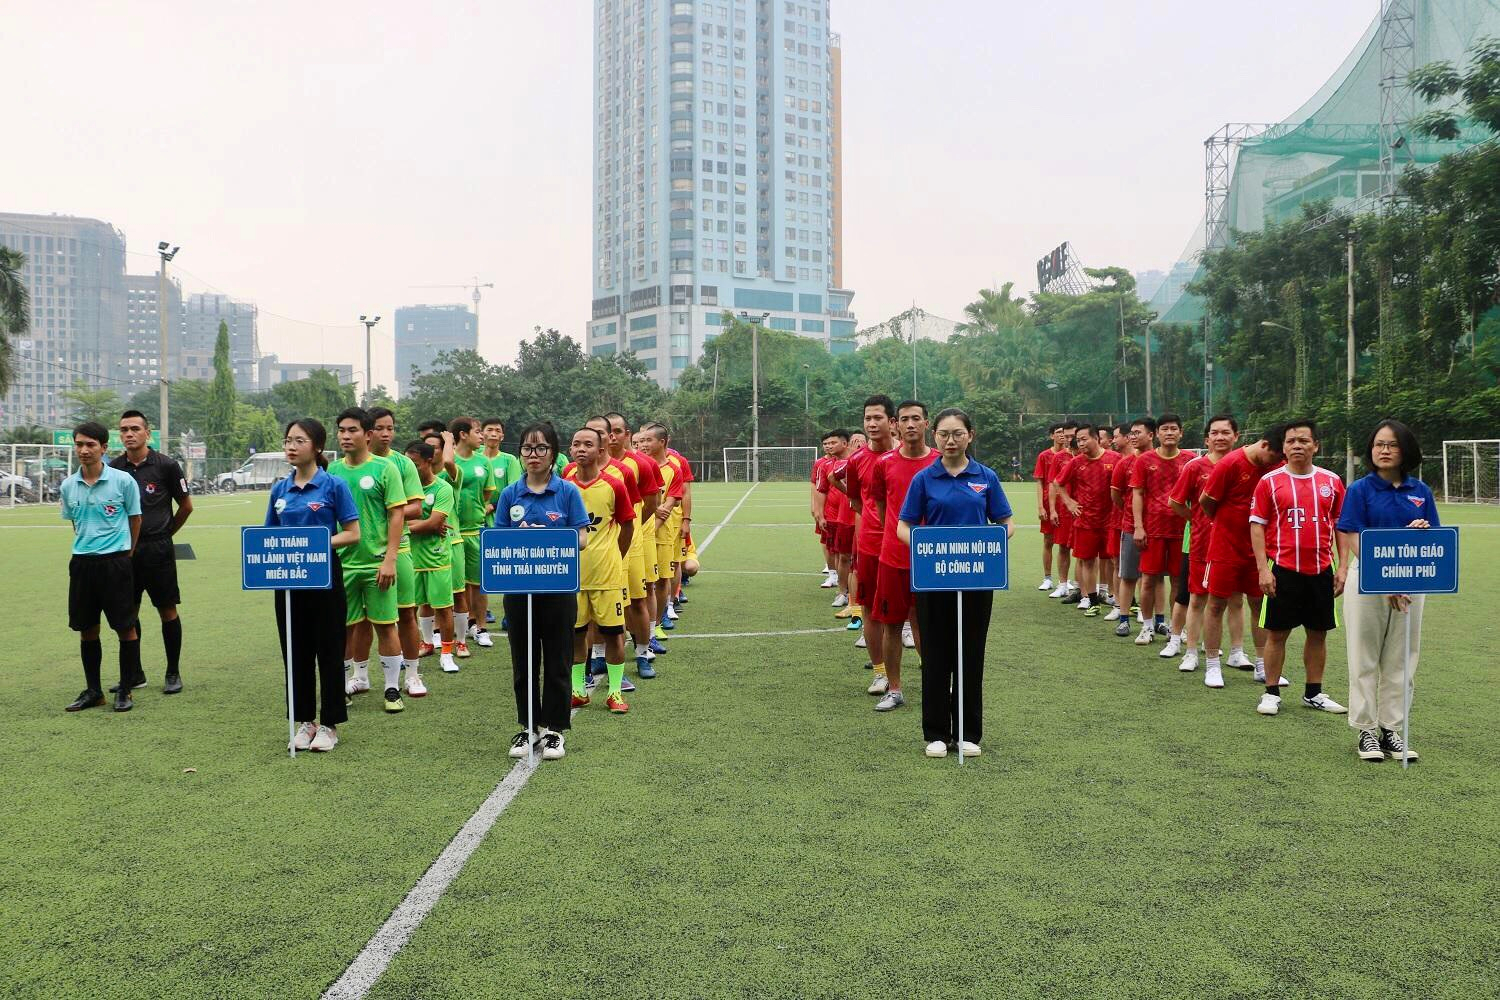 Religious teams join sport exchange celebrating 65 founding anniversary of Government Religious Committee